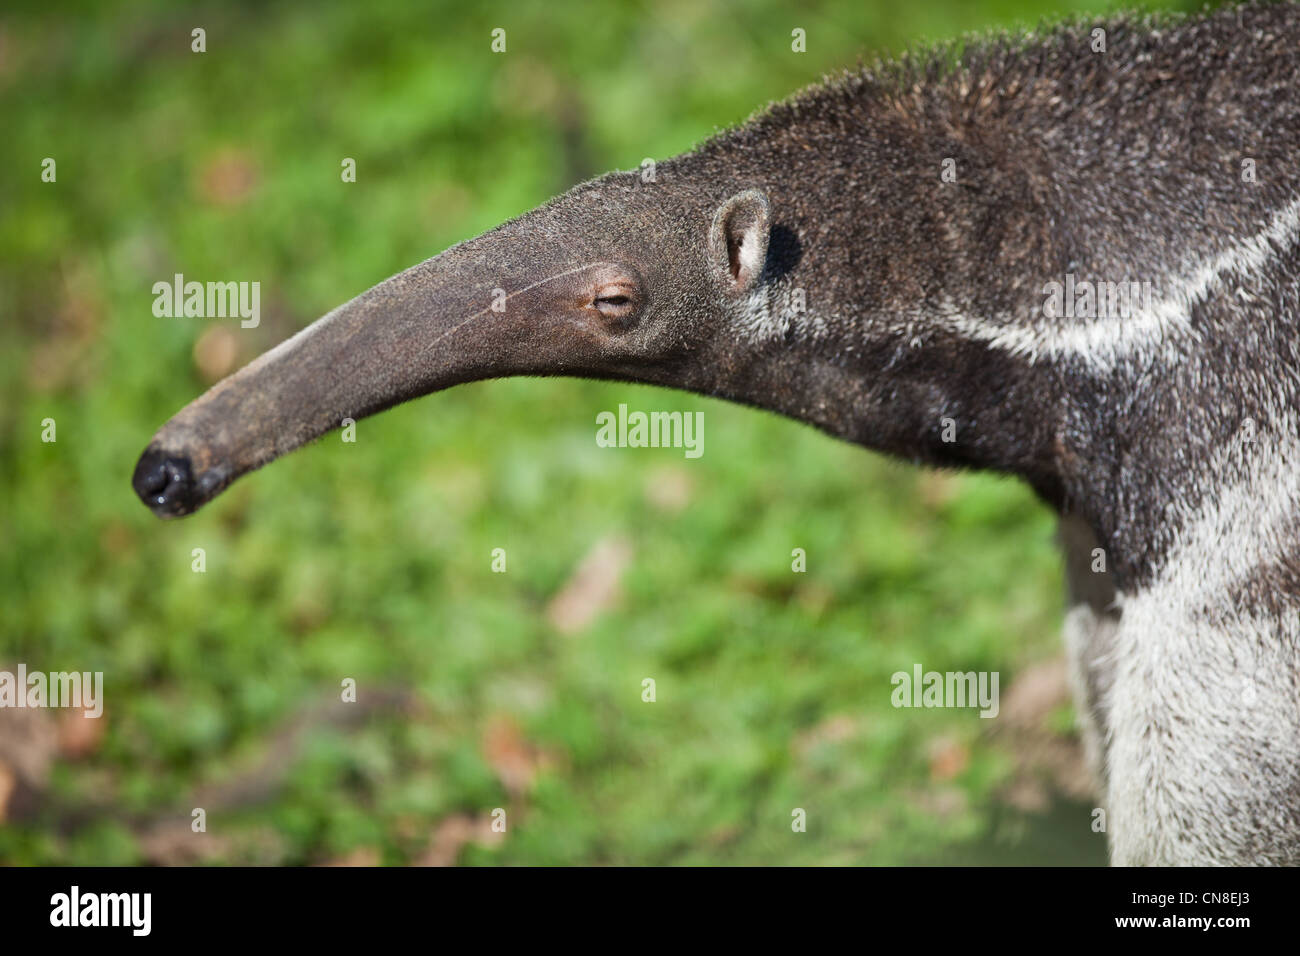 Giant anteater (Myrmecophaga tridactyla). Inserts: fore paw claws.